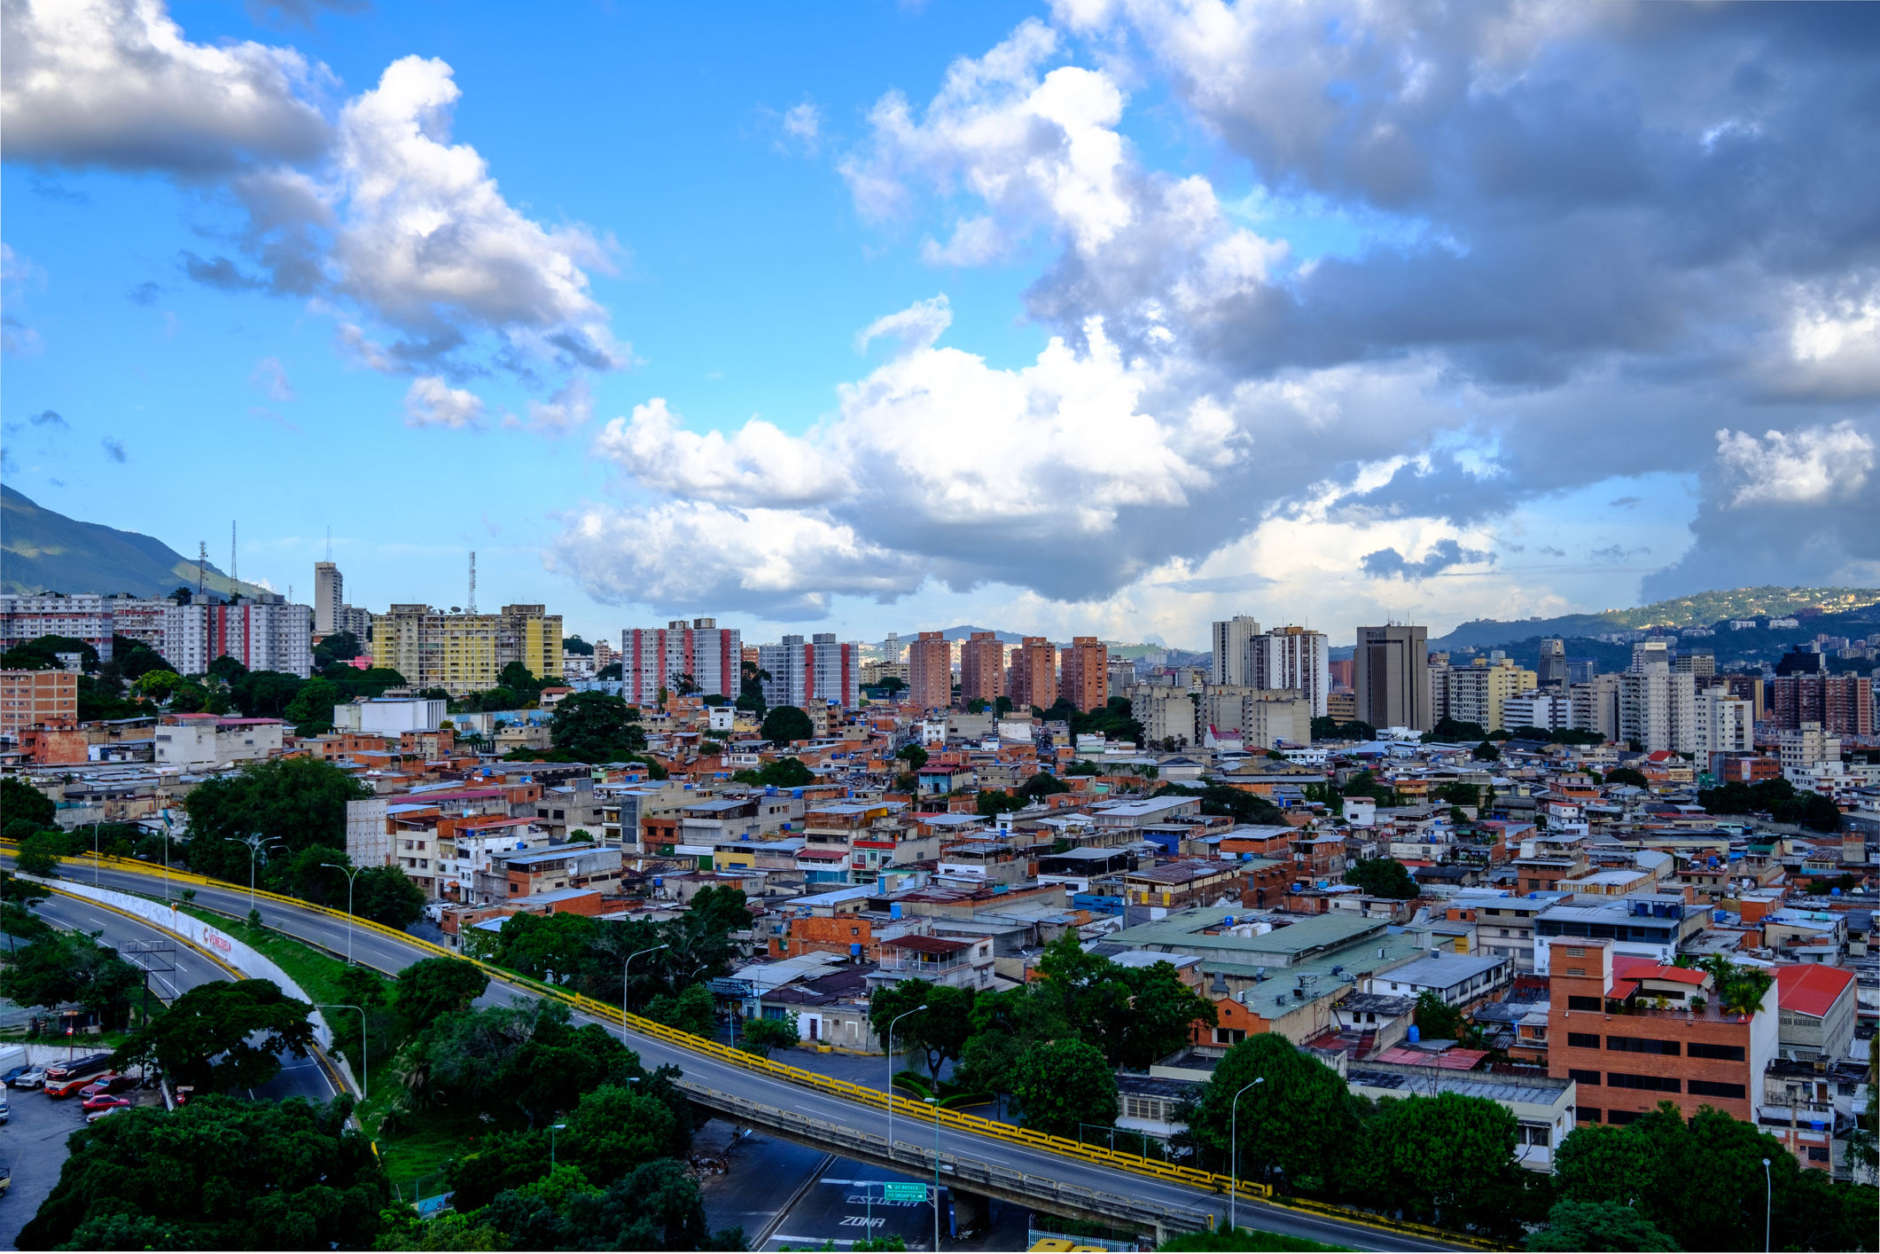 The vibrant city of Caracas, also known as the gateway to heaven, with its combination of urban architecture and natural scenery